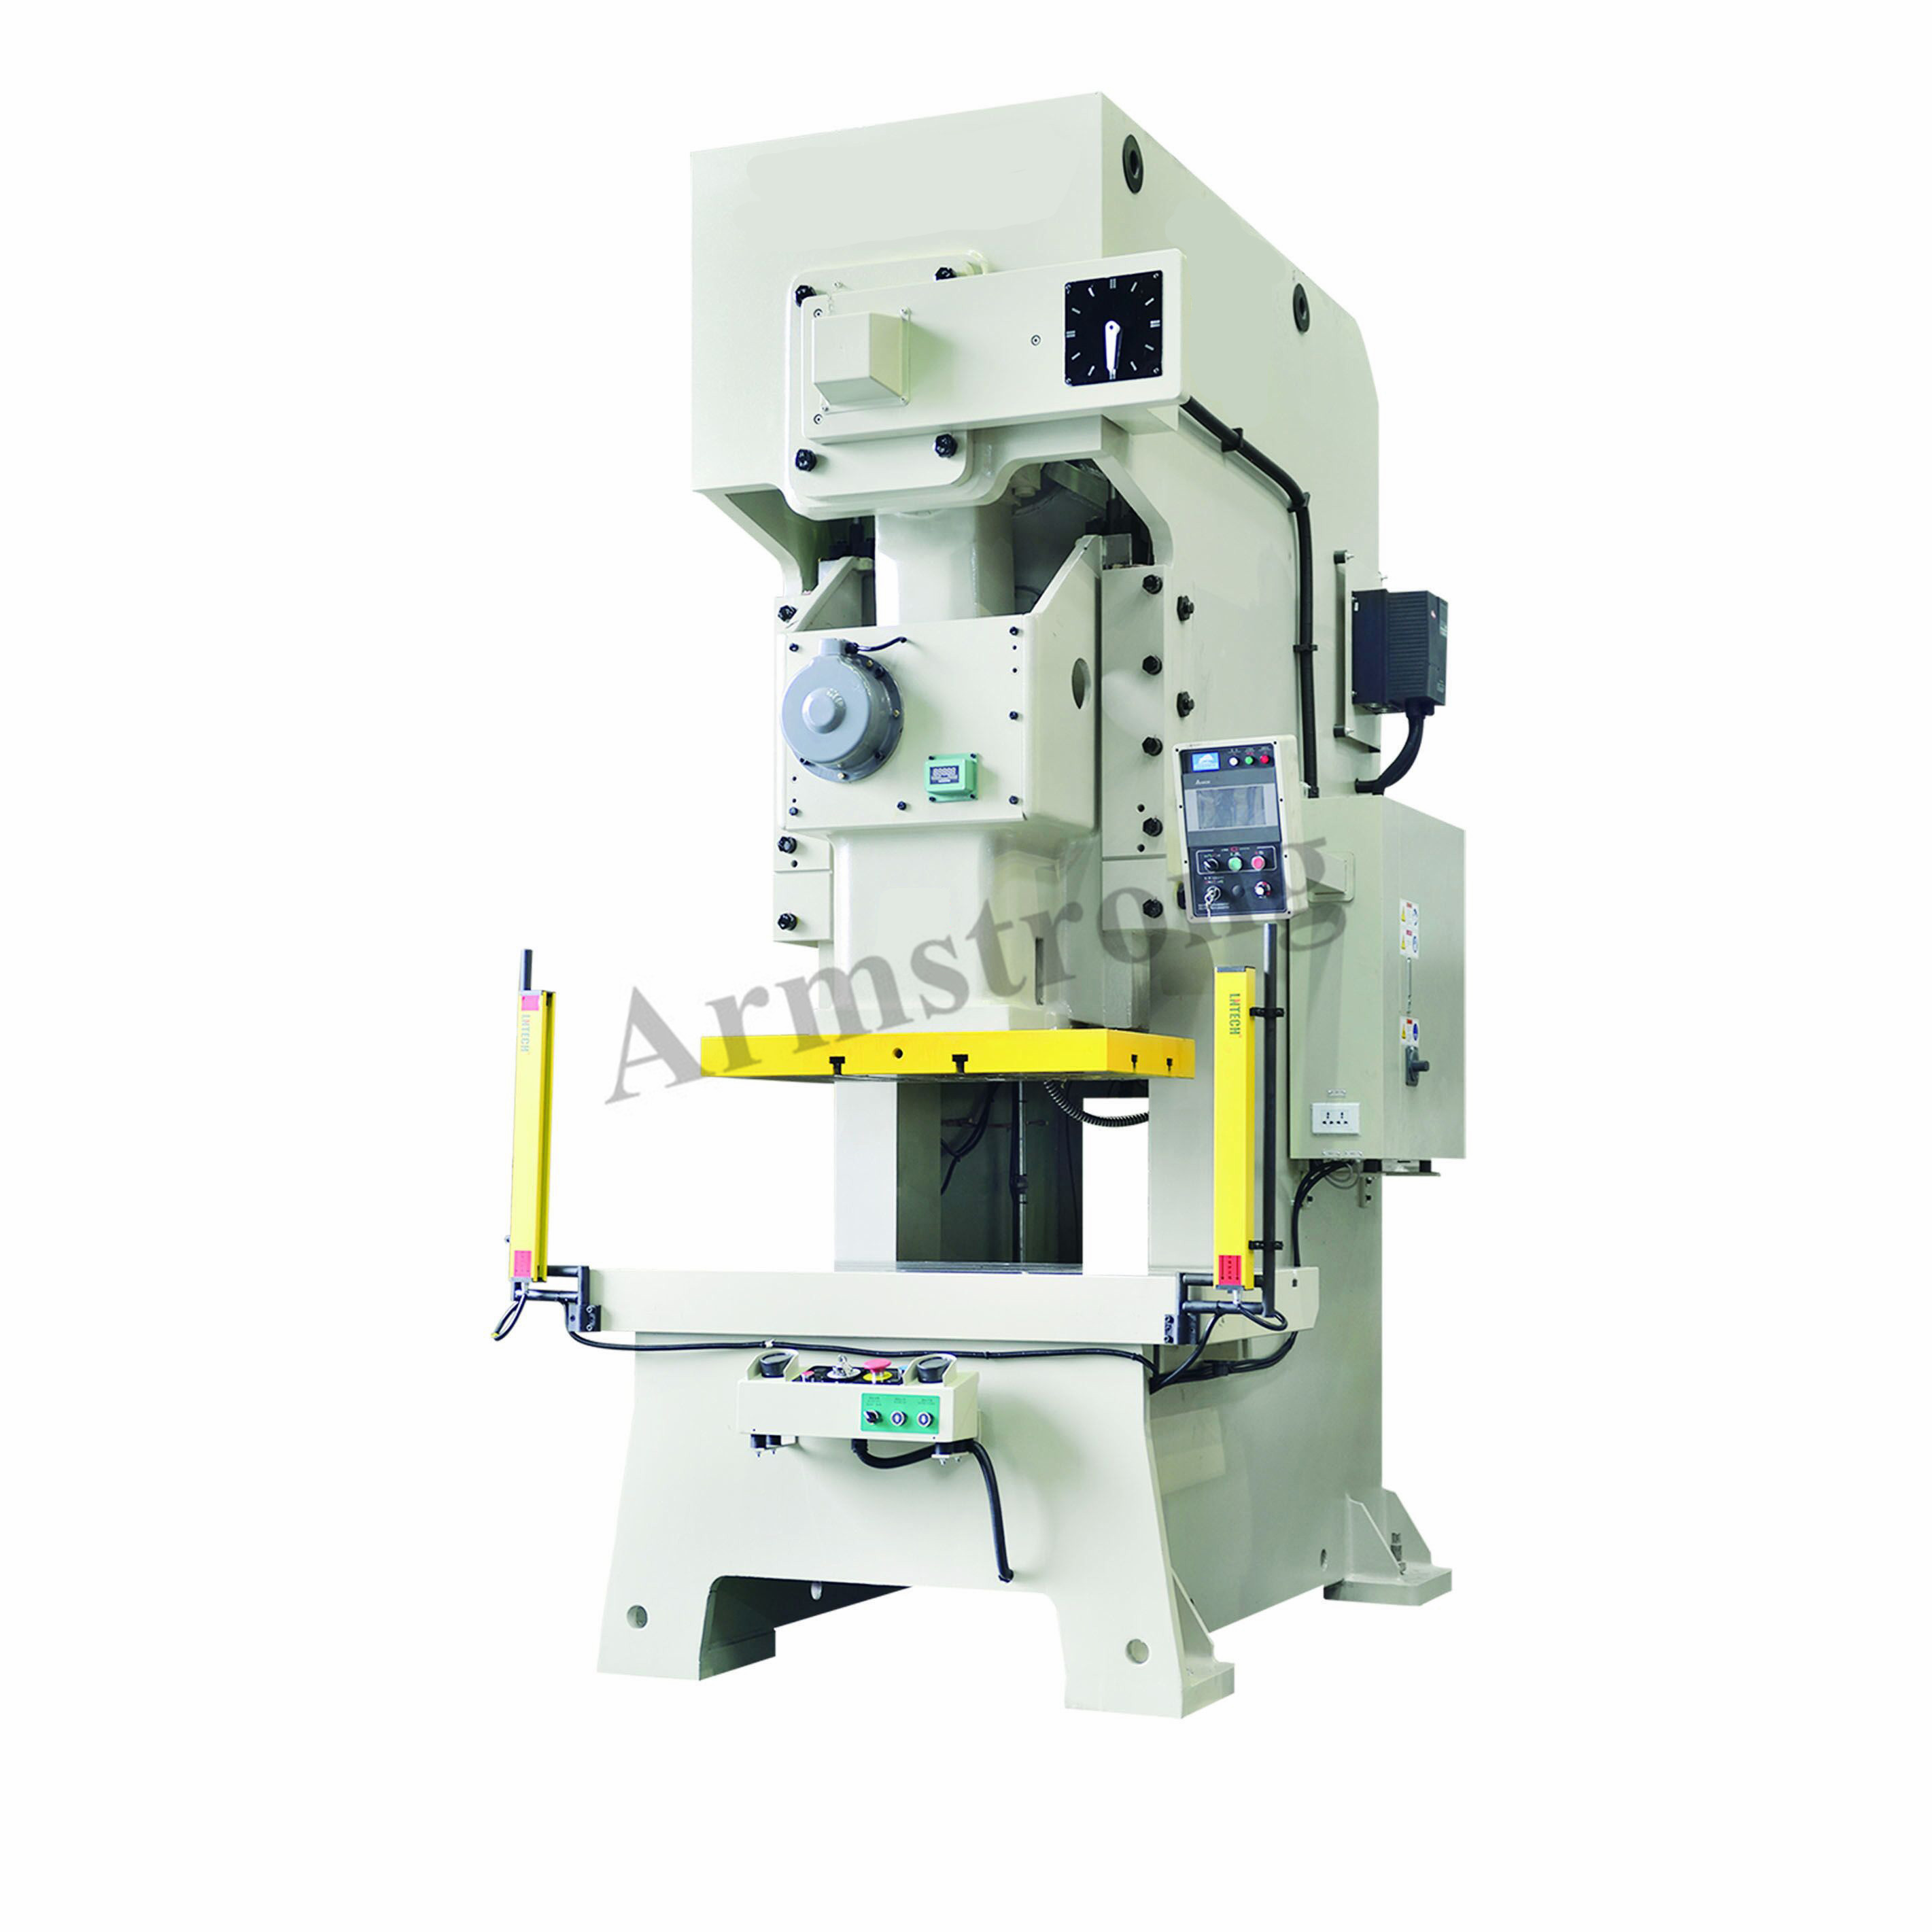 Punching machine used for stamping